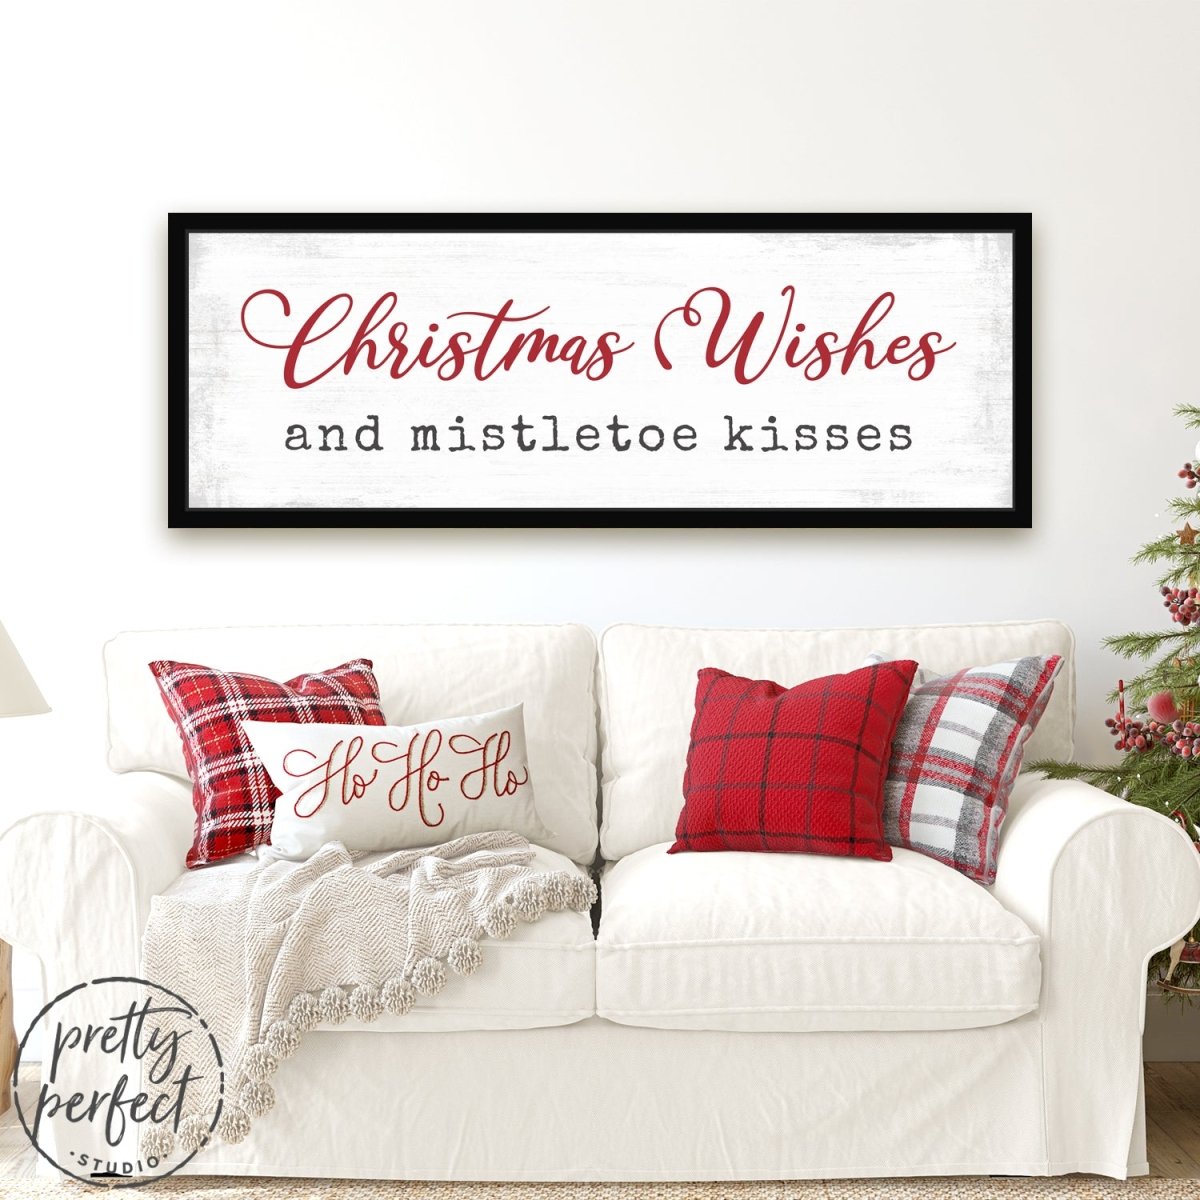 Christmas Wishes and Mistletoe Kisses Sign Above Bed - Pretty Perfect Studio